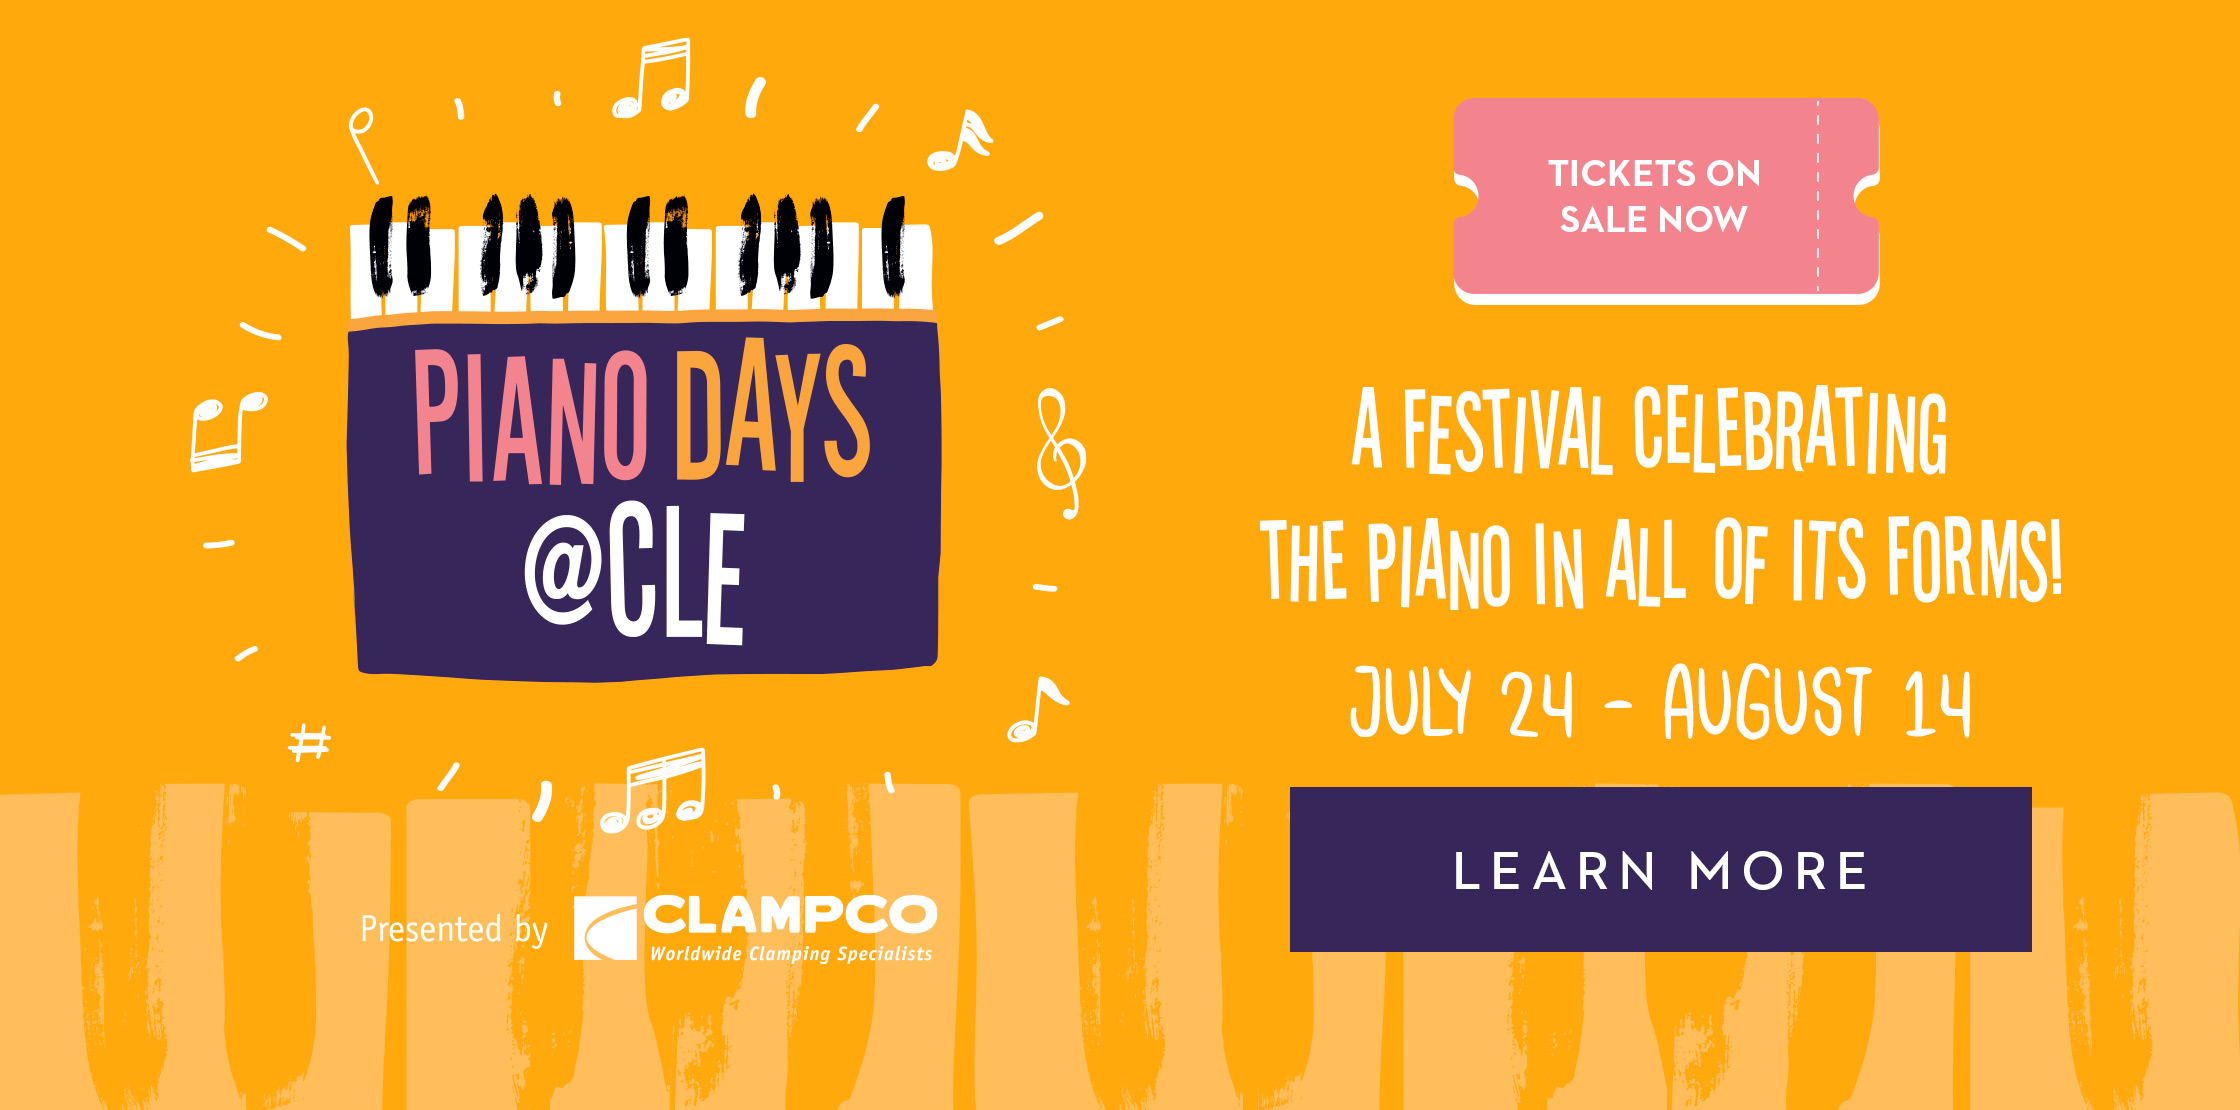 Piano Days @CLE July 24 - August 14, 2022